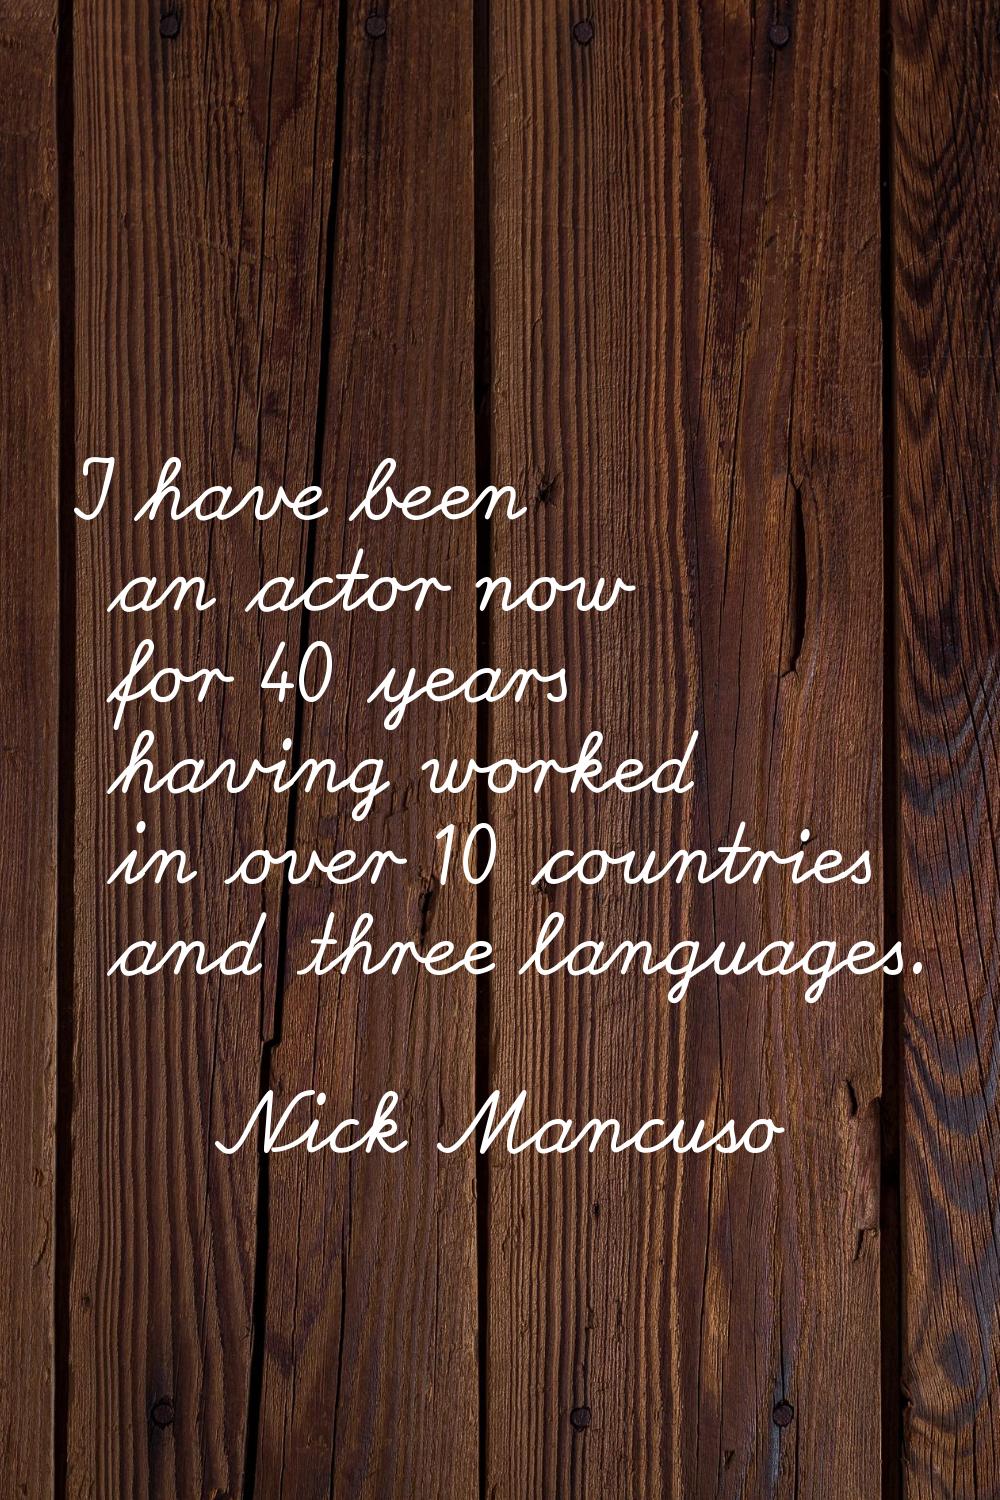 I have been an actor now for 40 years having worked in over 10 countries and three languages.